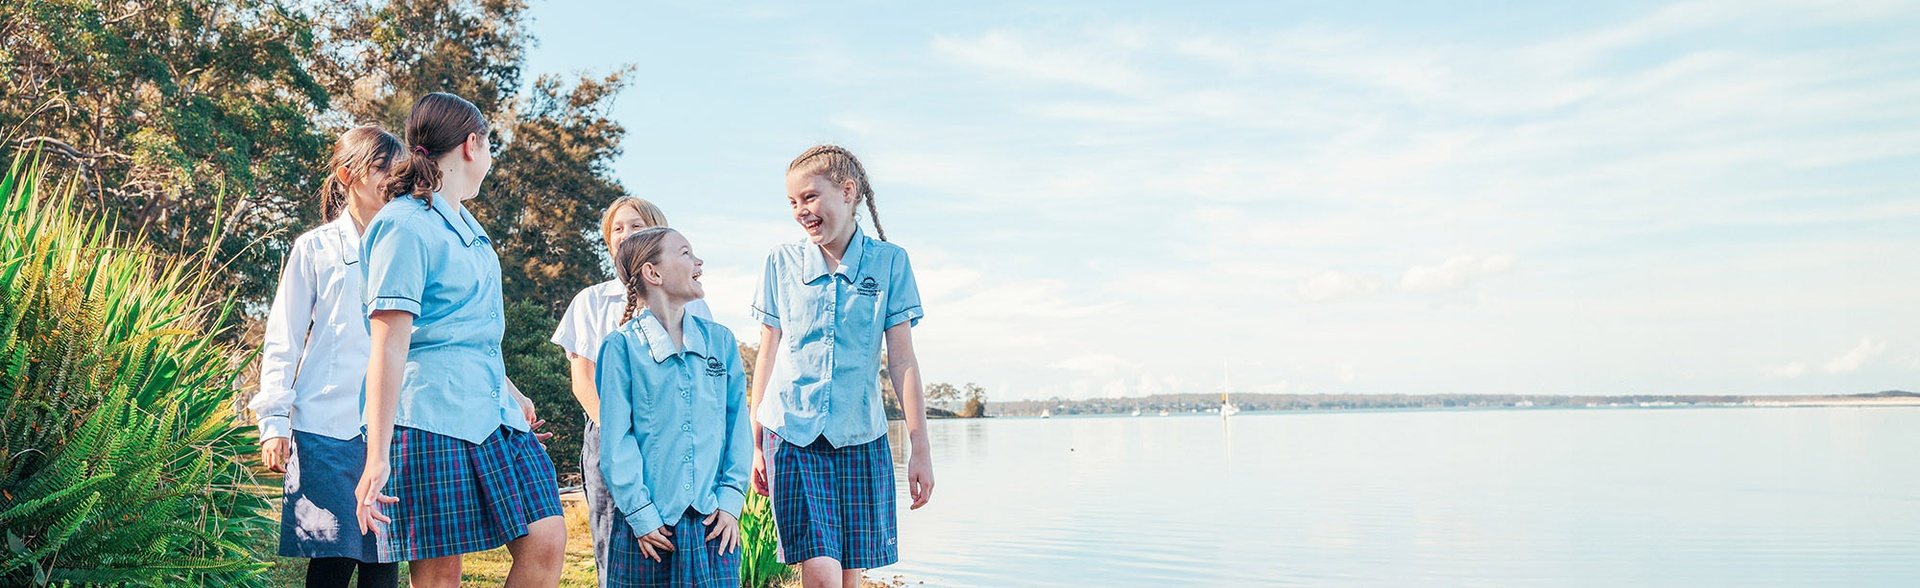 Brightwaters students in light blue uniform walking along Lake Macquarie waterfront